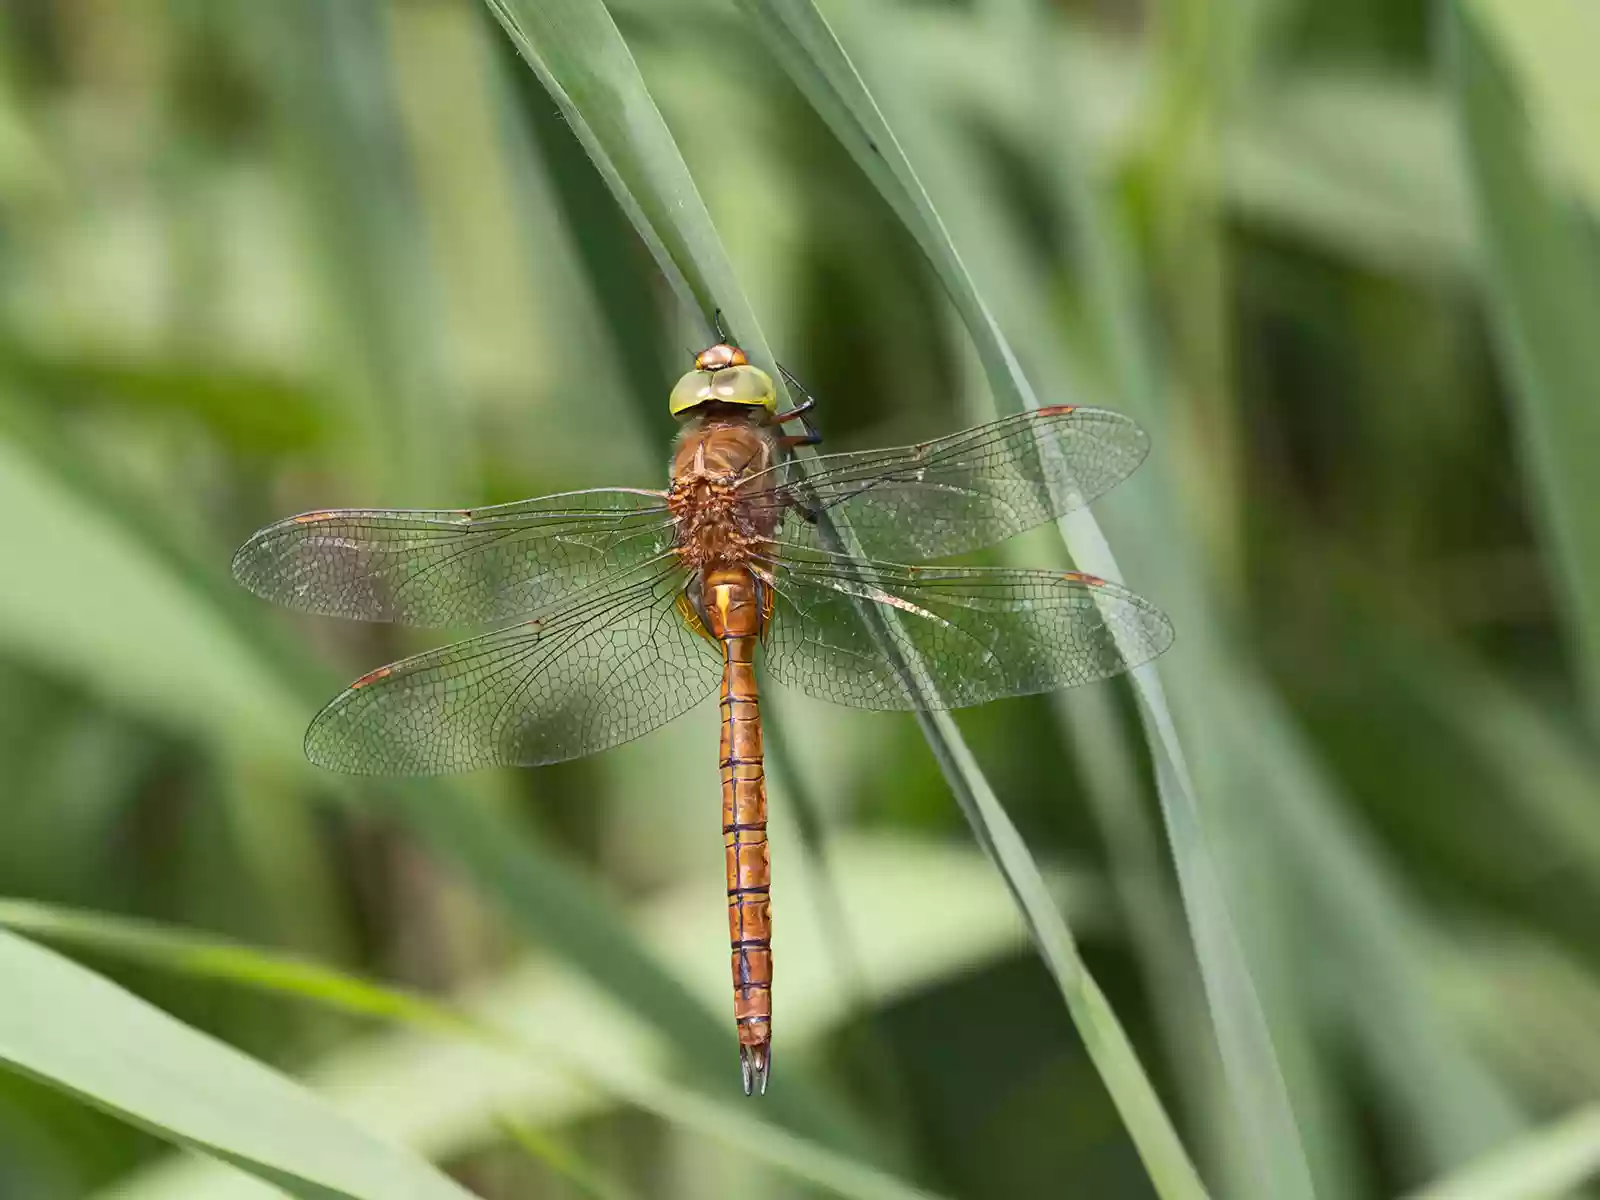 Norfolk Hawker Dragonfly, Aeshna isoceles. David Tipling With Olympus 100-400mm lens